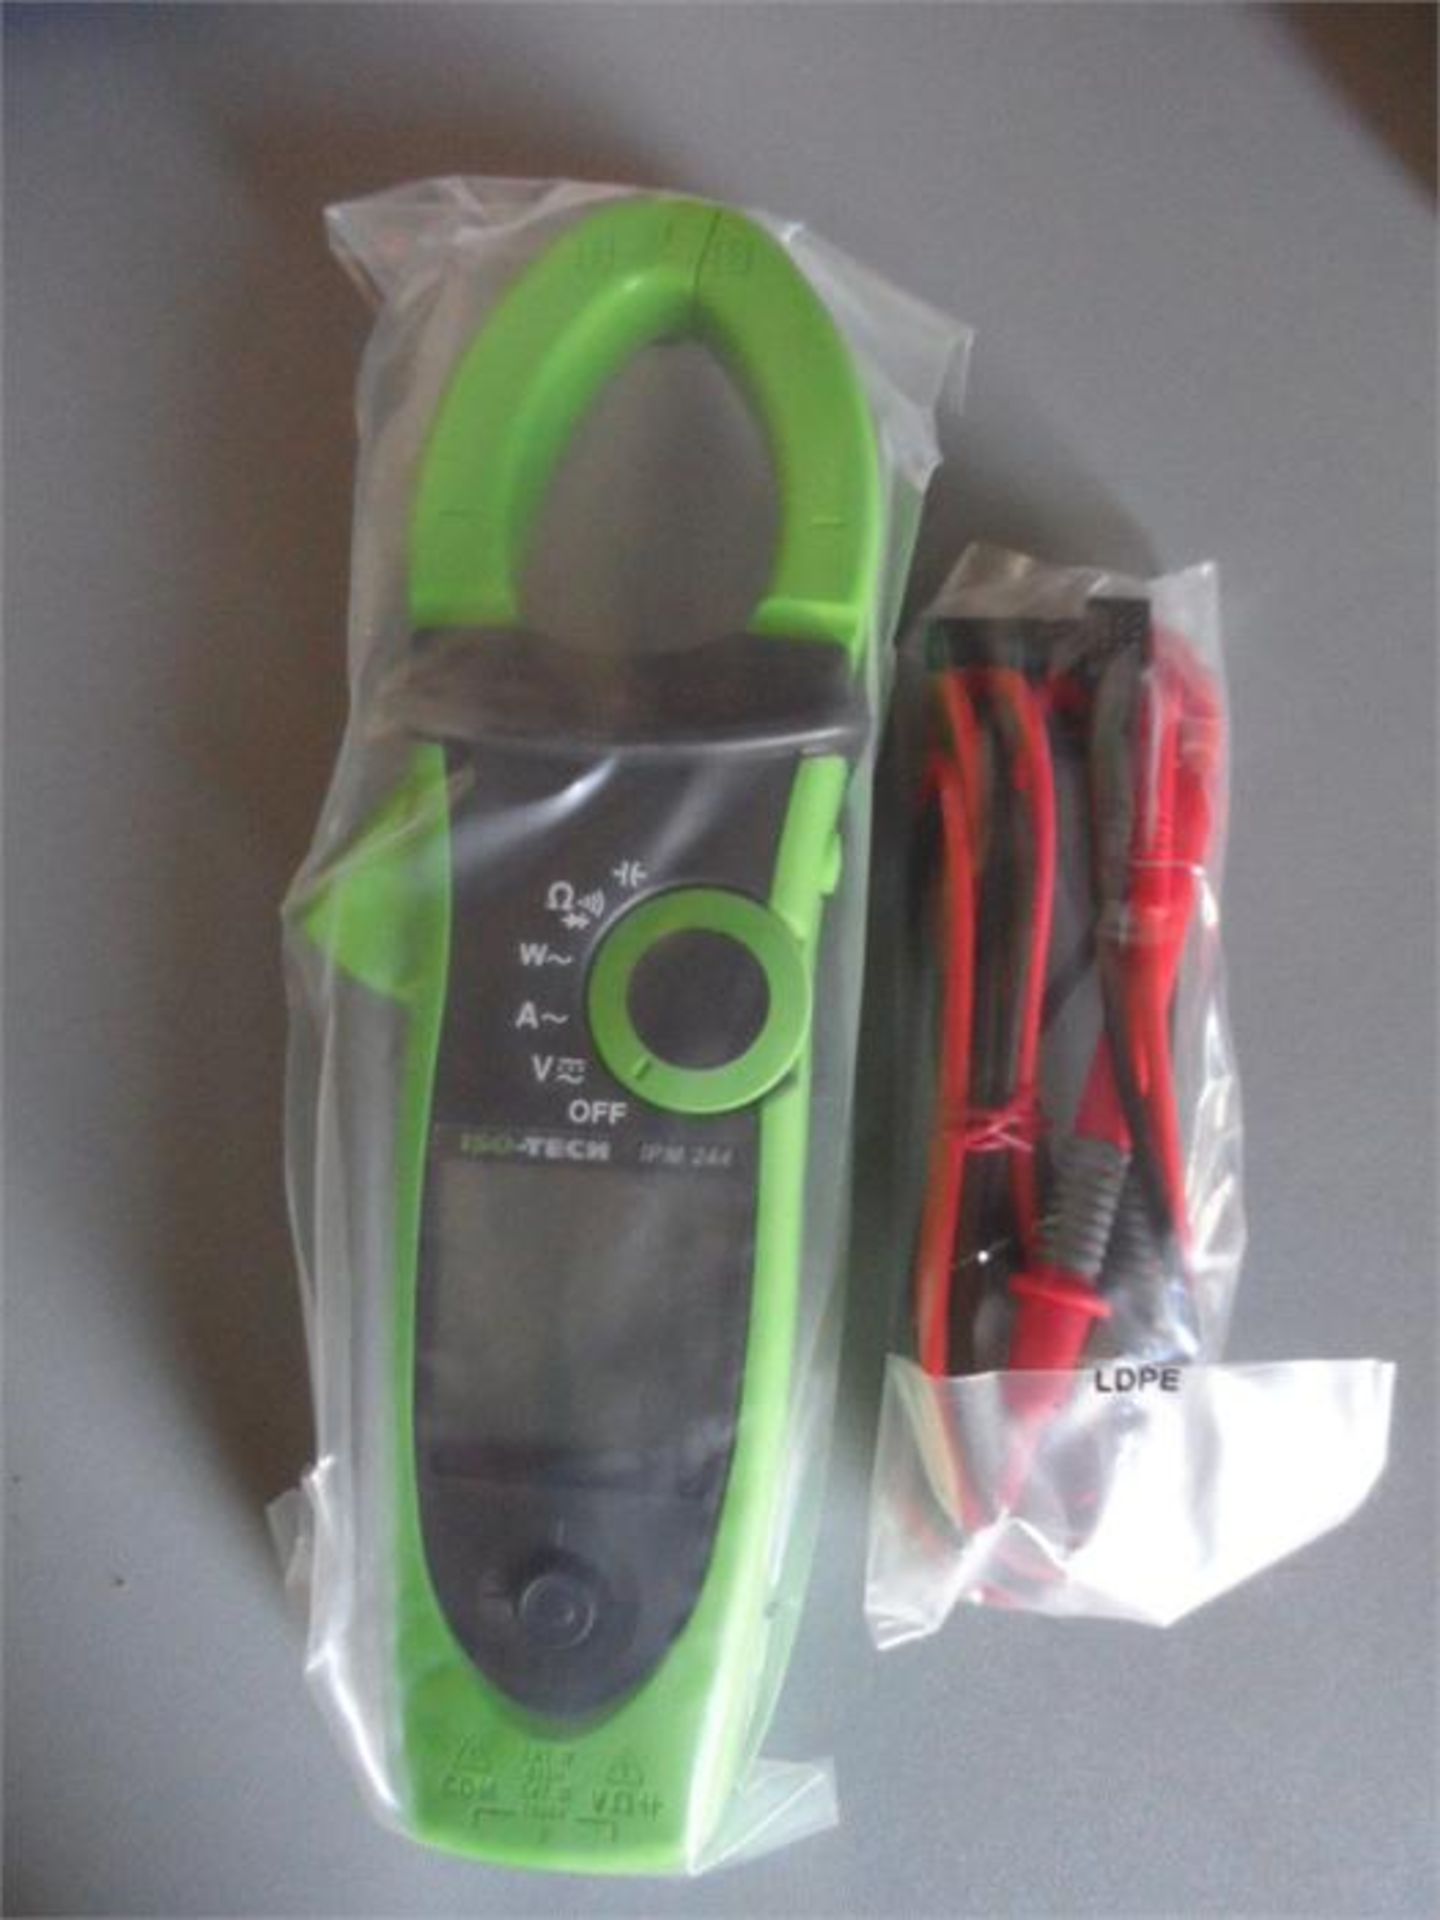 NEW ISO-TECH IPM 244 Power Clamp Meter - 1000a AC